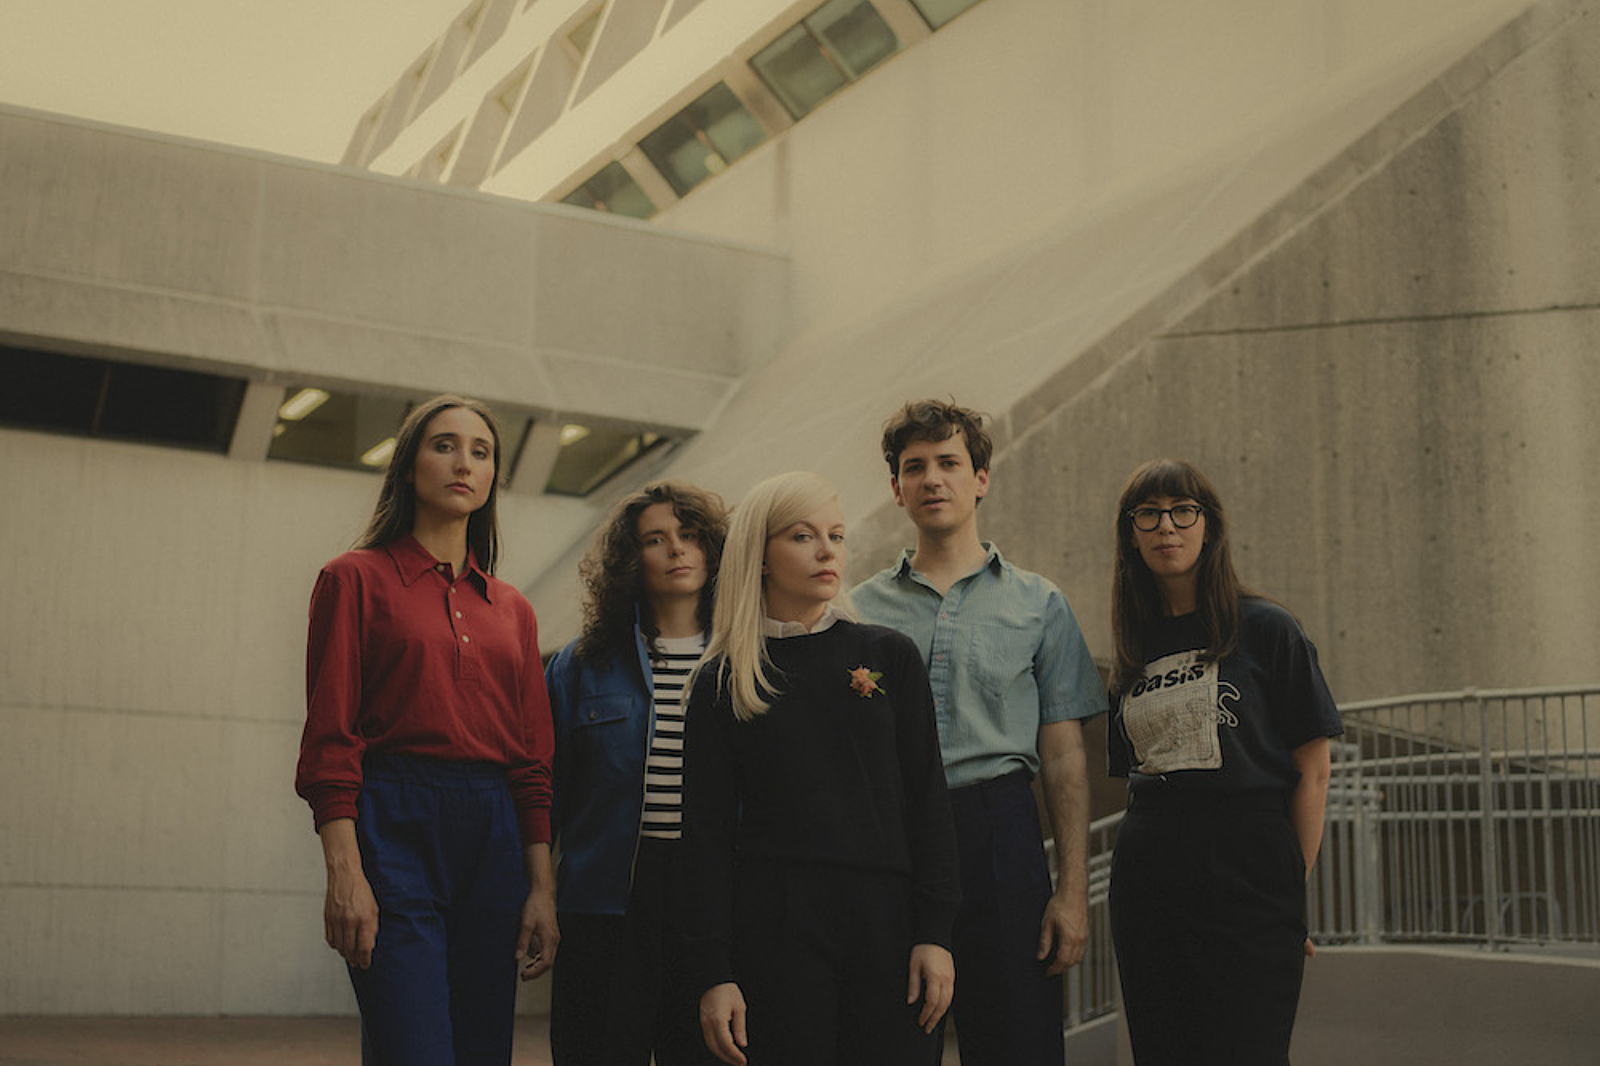 Alvvays are off on tour across the UK and Europe